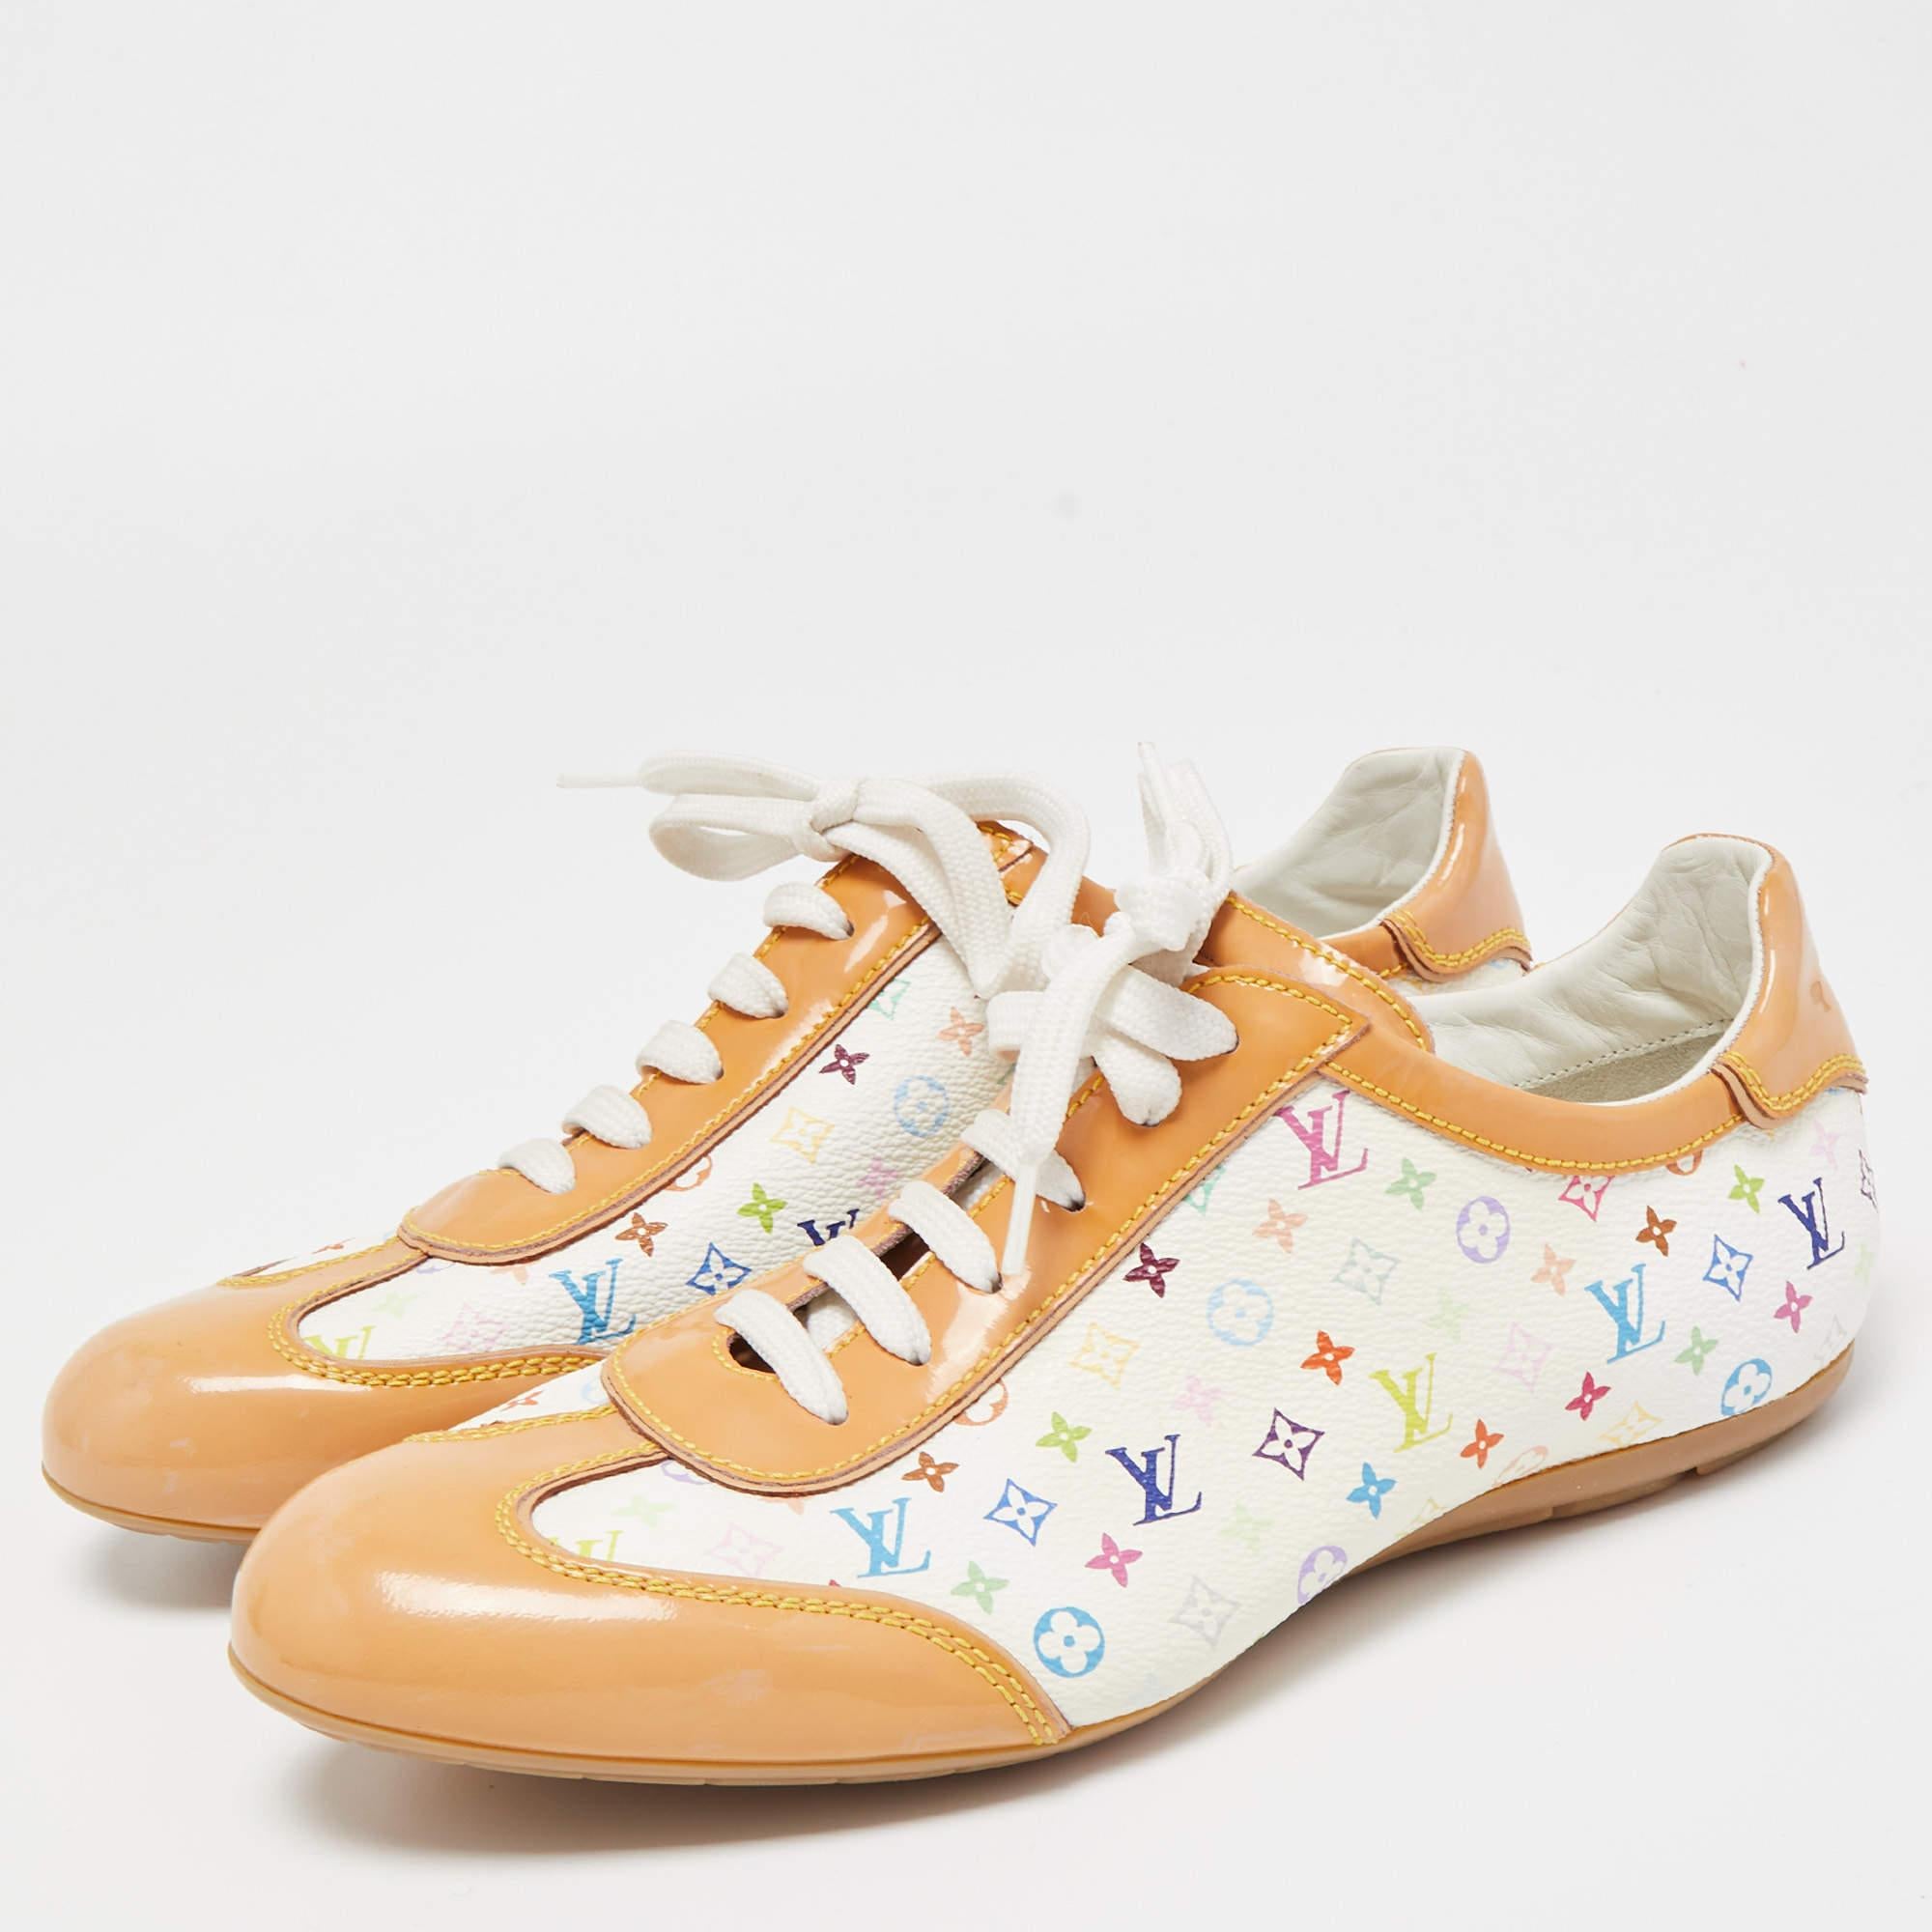 These sneakers from LV represent the best of fashion. They are crafted from high-quality materials and designed with nothing but style. A perfect fit for all casual occasions, these sneakers will spruce up any look effortlessly.

